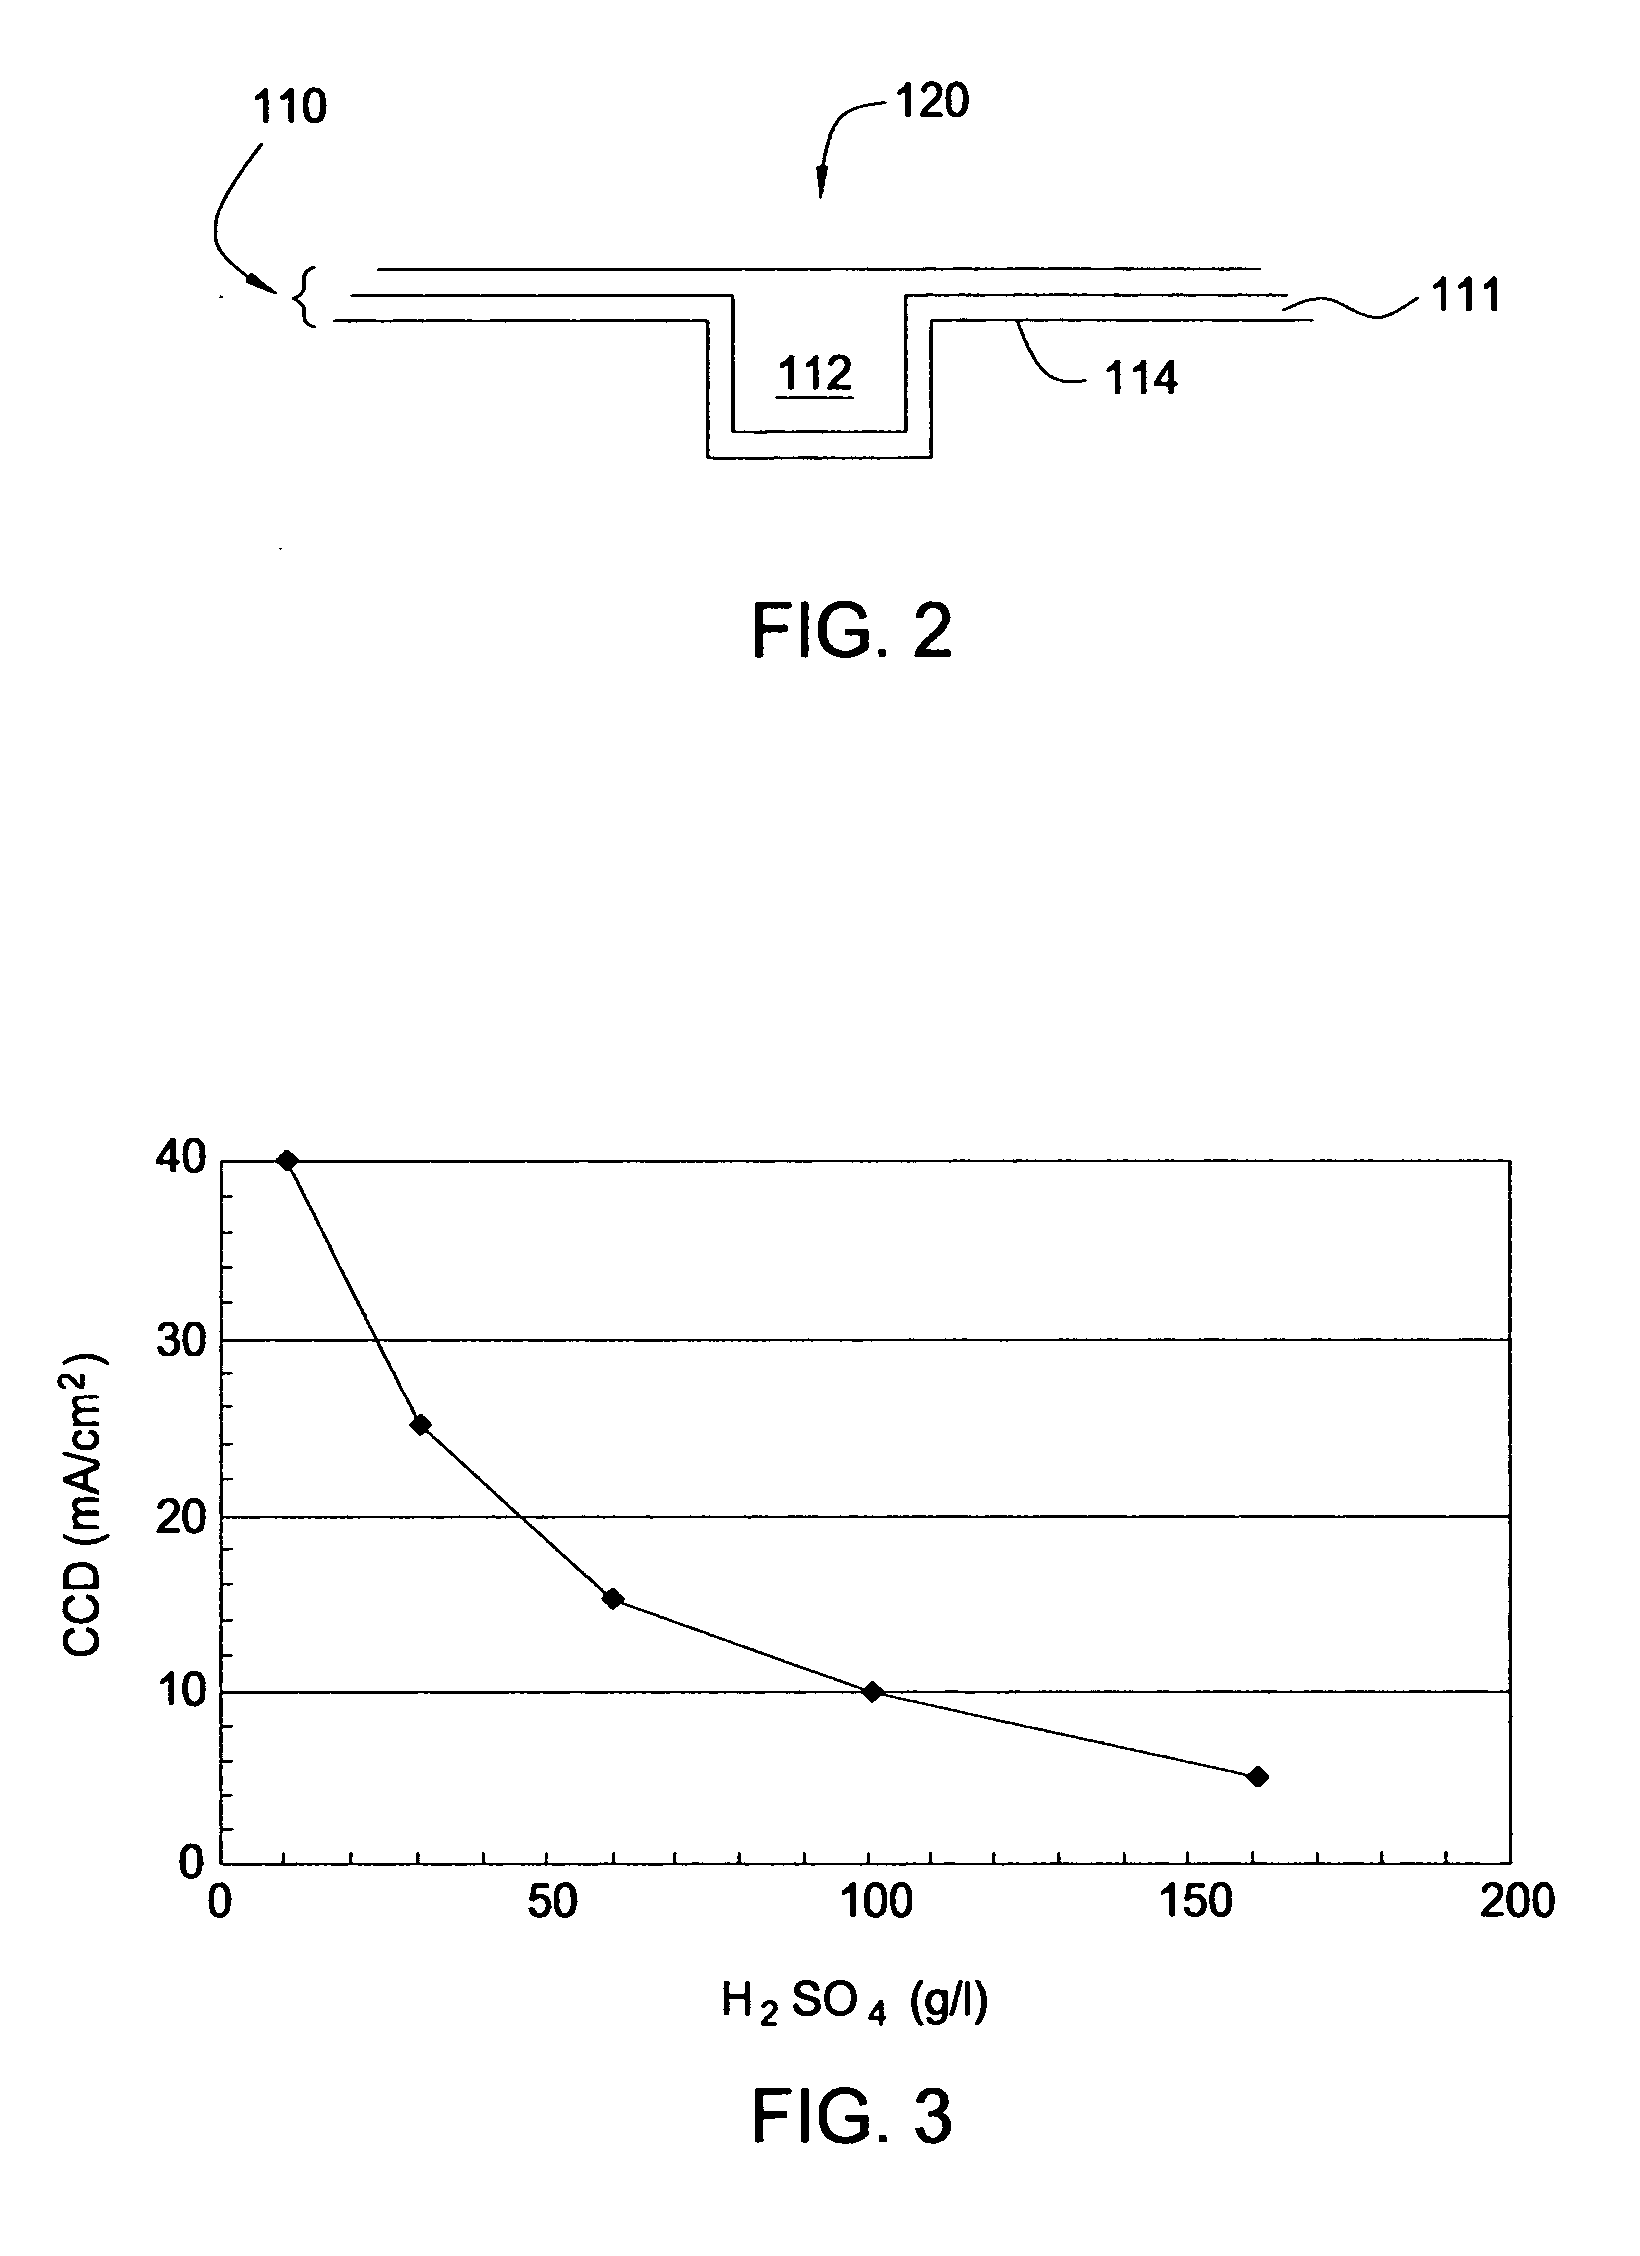 Method of direct plating of copper on a ruthenium alloy